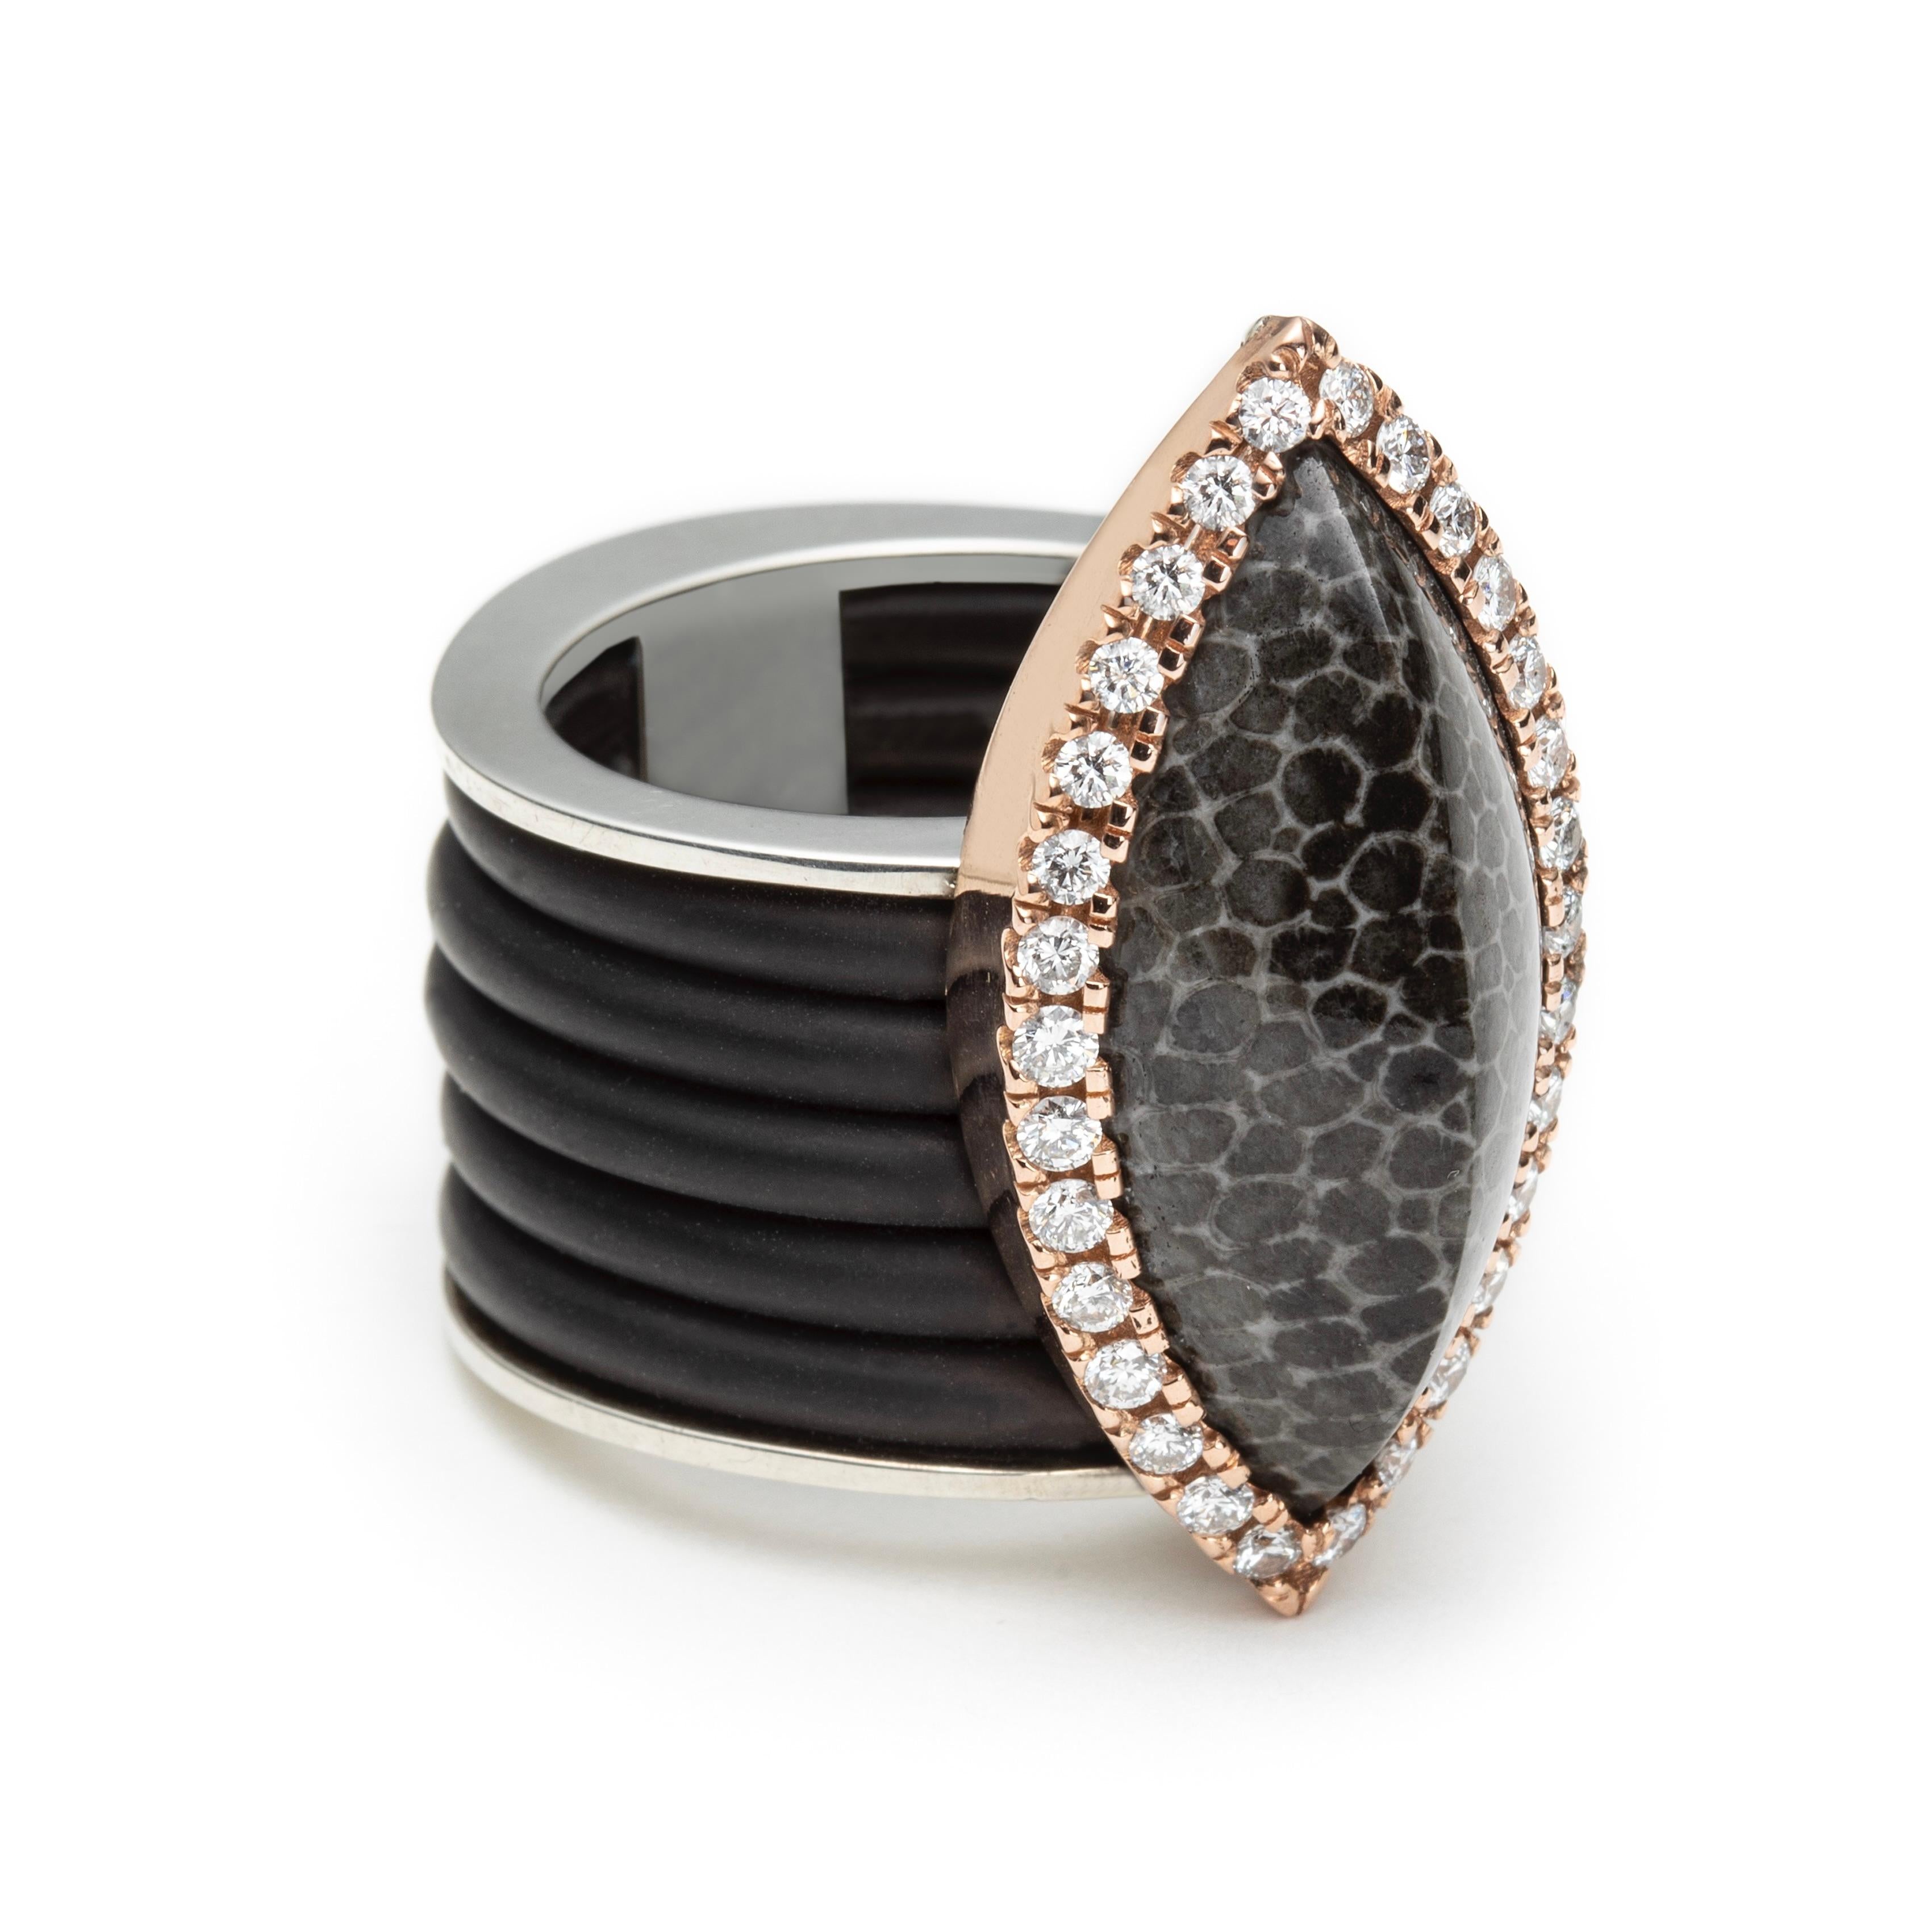 JURASSICA Ring in 18K Rose Gold Silver with Fossil Agate + Diamonds by Serafino

This ring features a stunning 1 inch fossilized coral agate cabochon surrounded by a diamond halo set in 18K rose gold. The shank of the ring is made of a sterling